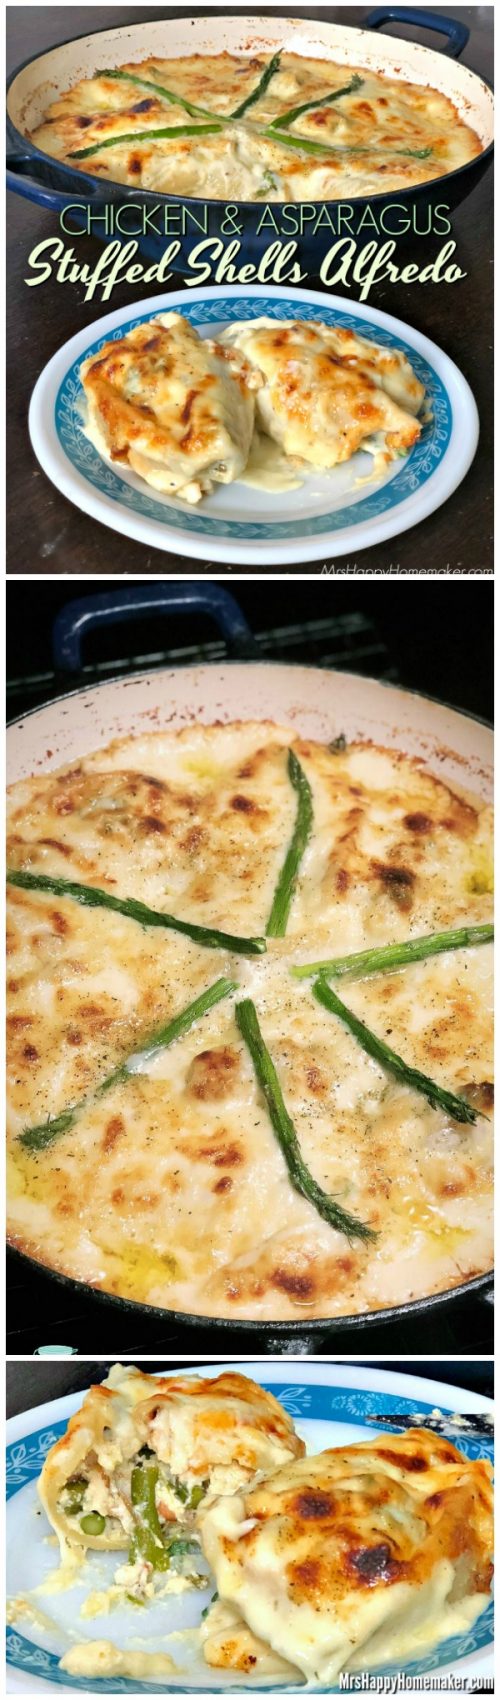 CHICKEN & ASPARAGUS STUFFED SHELLS ALFREDO - Chicken & asparagus mixed with ricotta & mozzarella – stuffed in jumbo shells & baked with a super simple homemade Alfredo til perfection. ADDICTIVE!! | MrsHappyHomemaker.com @mrshappyhomemaker